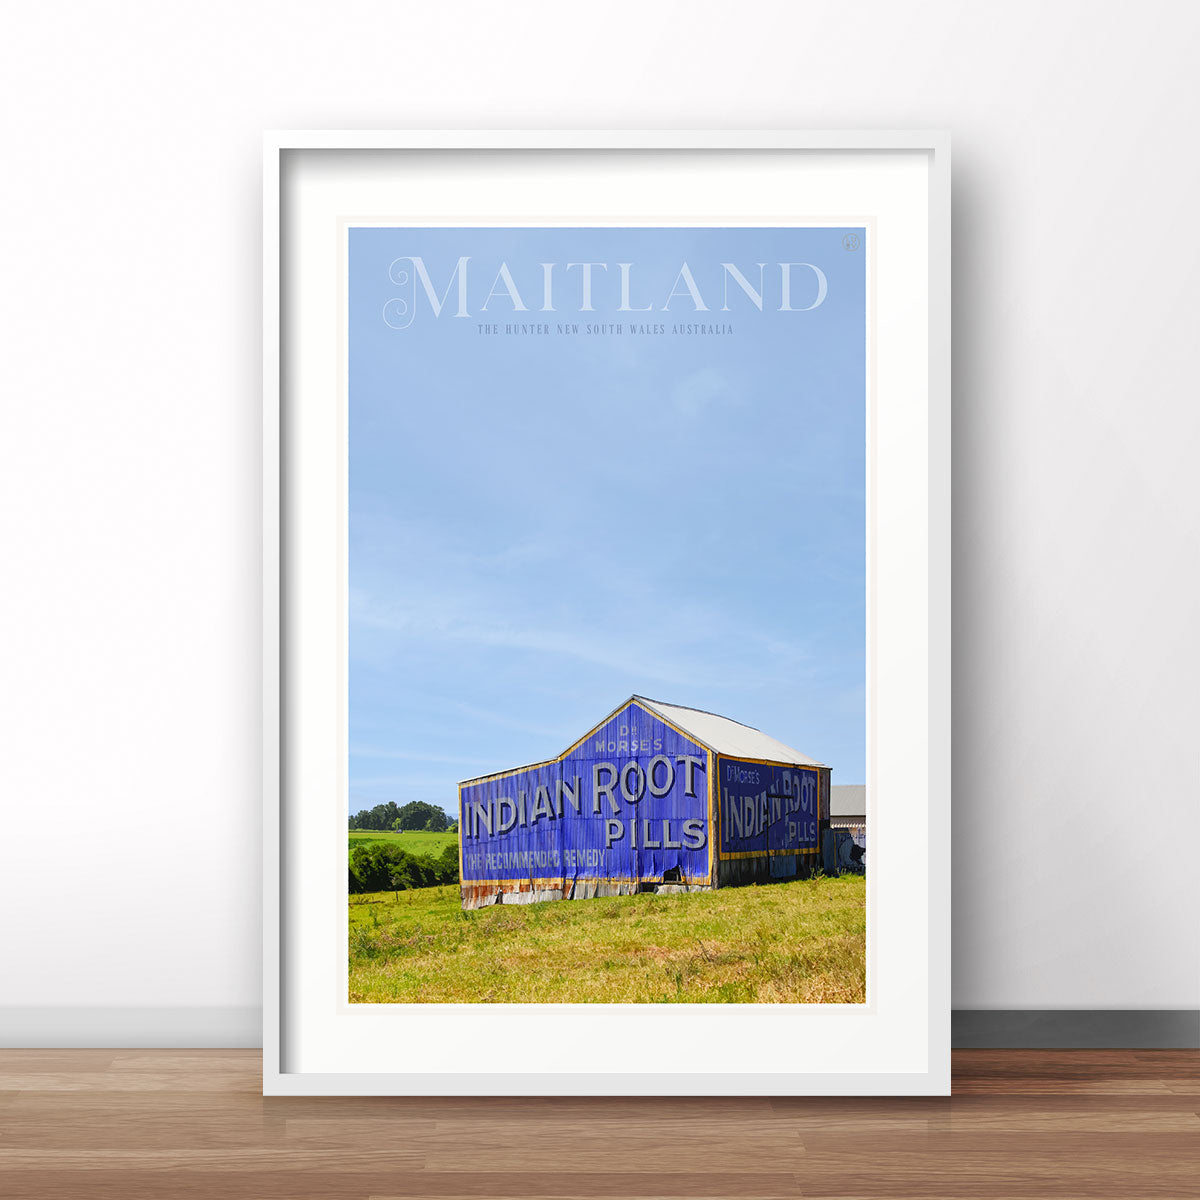 Maitland vintage travel print poster by places we luv